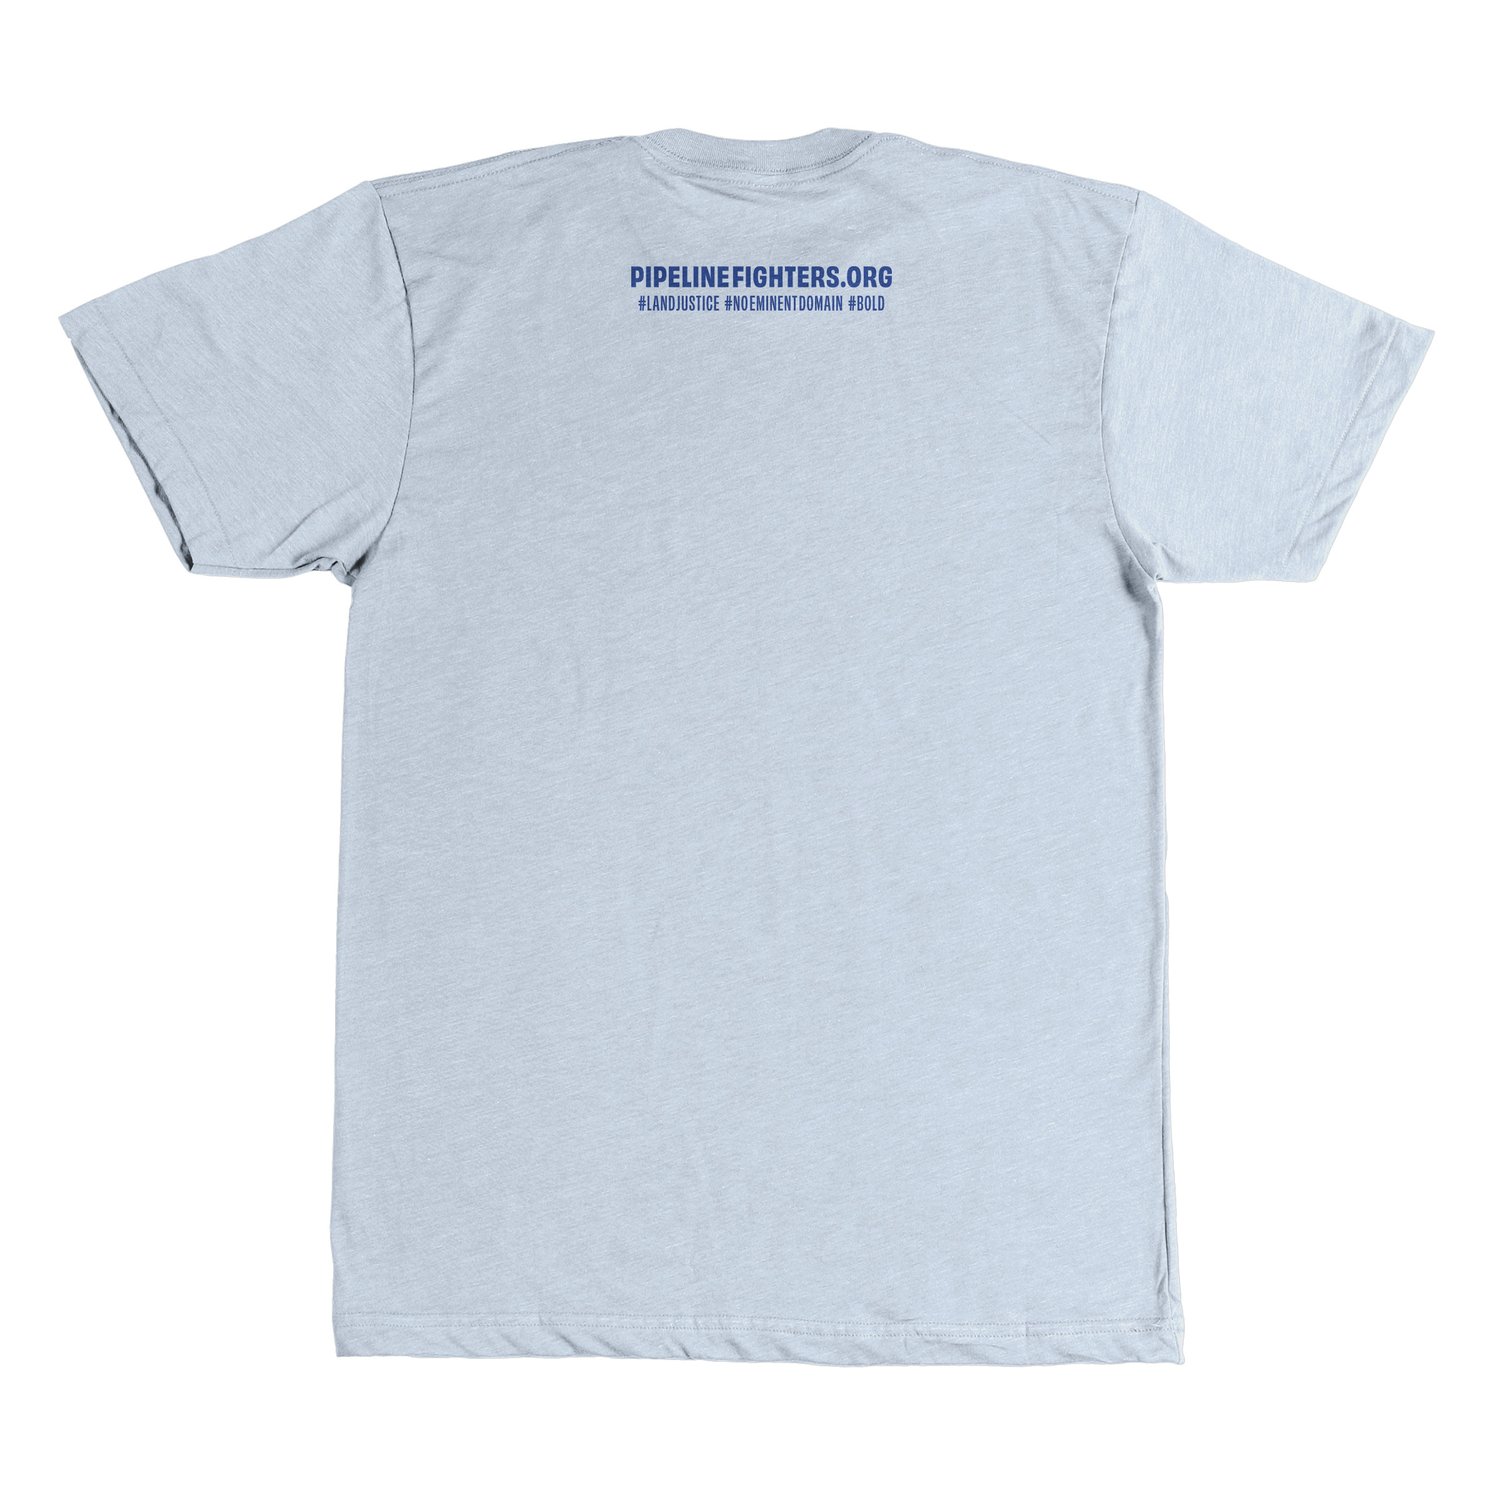 Image of Iowa Pipeline Fighter t-shirt (grey short sleeve)